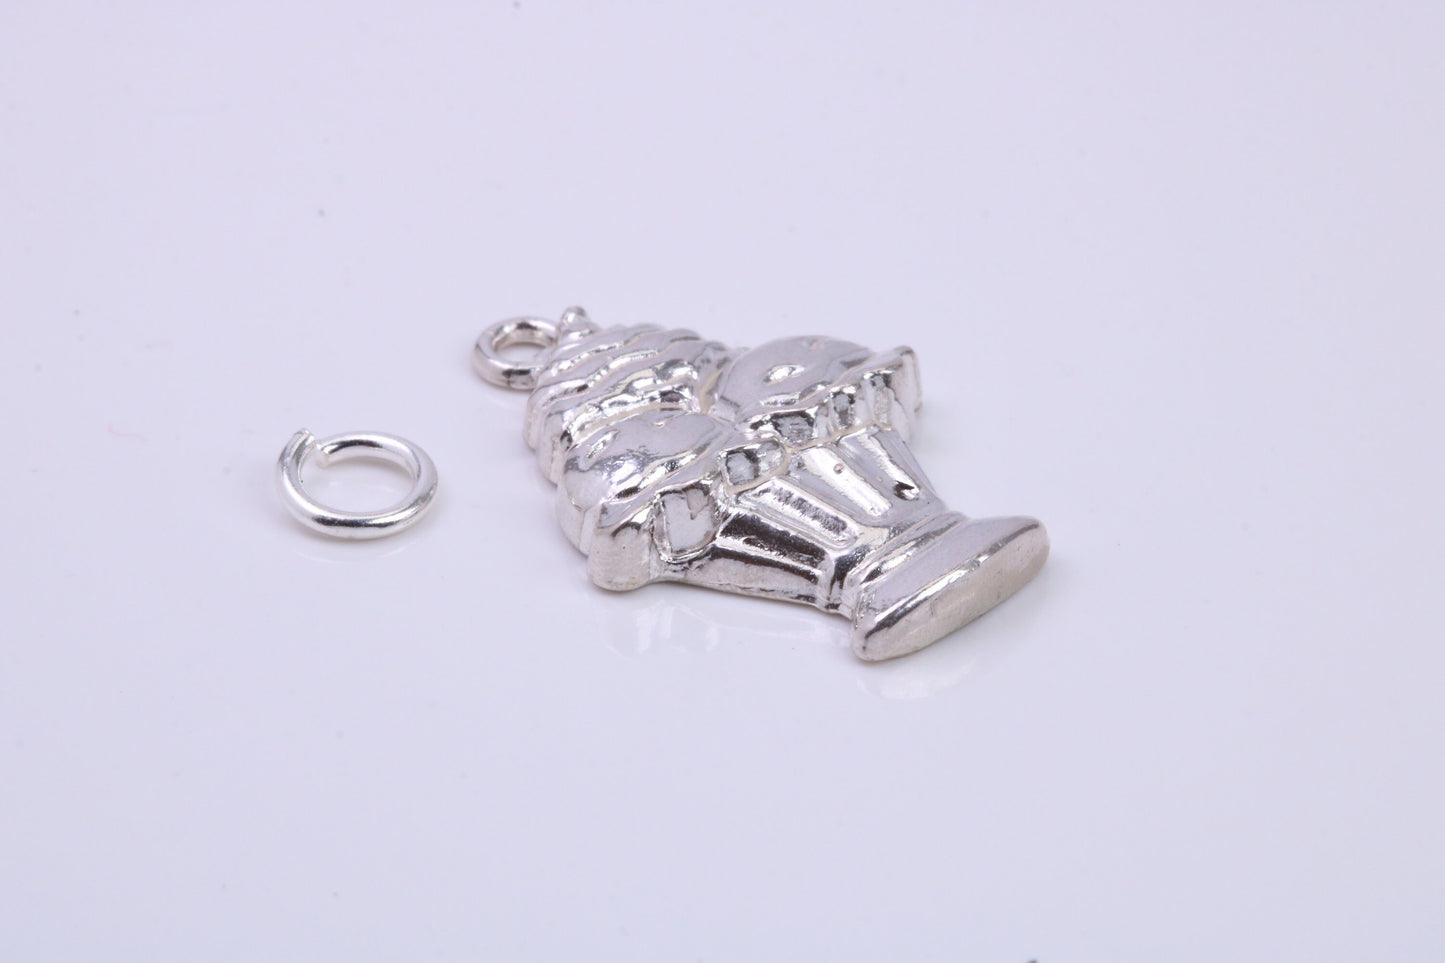 Sundae Charm, Traditional Charm, Made from Solid 925 Grade Sterling Silver, Complete with Attachment Link